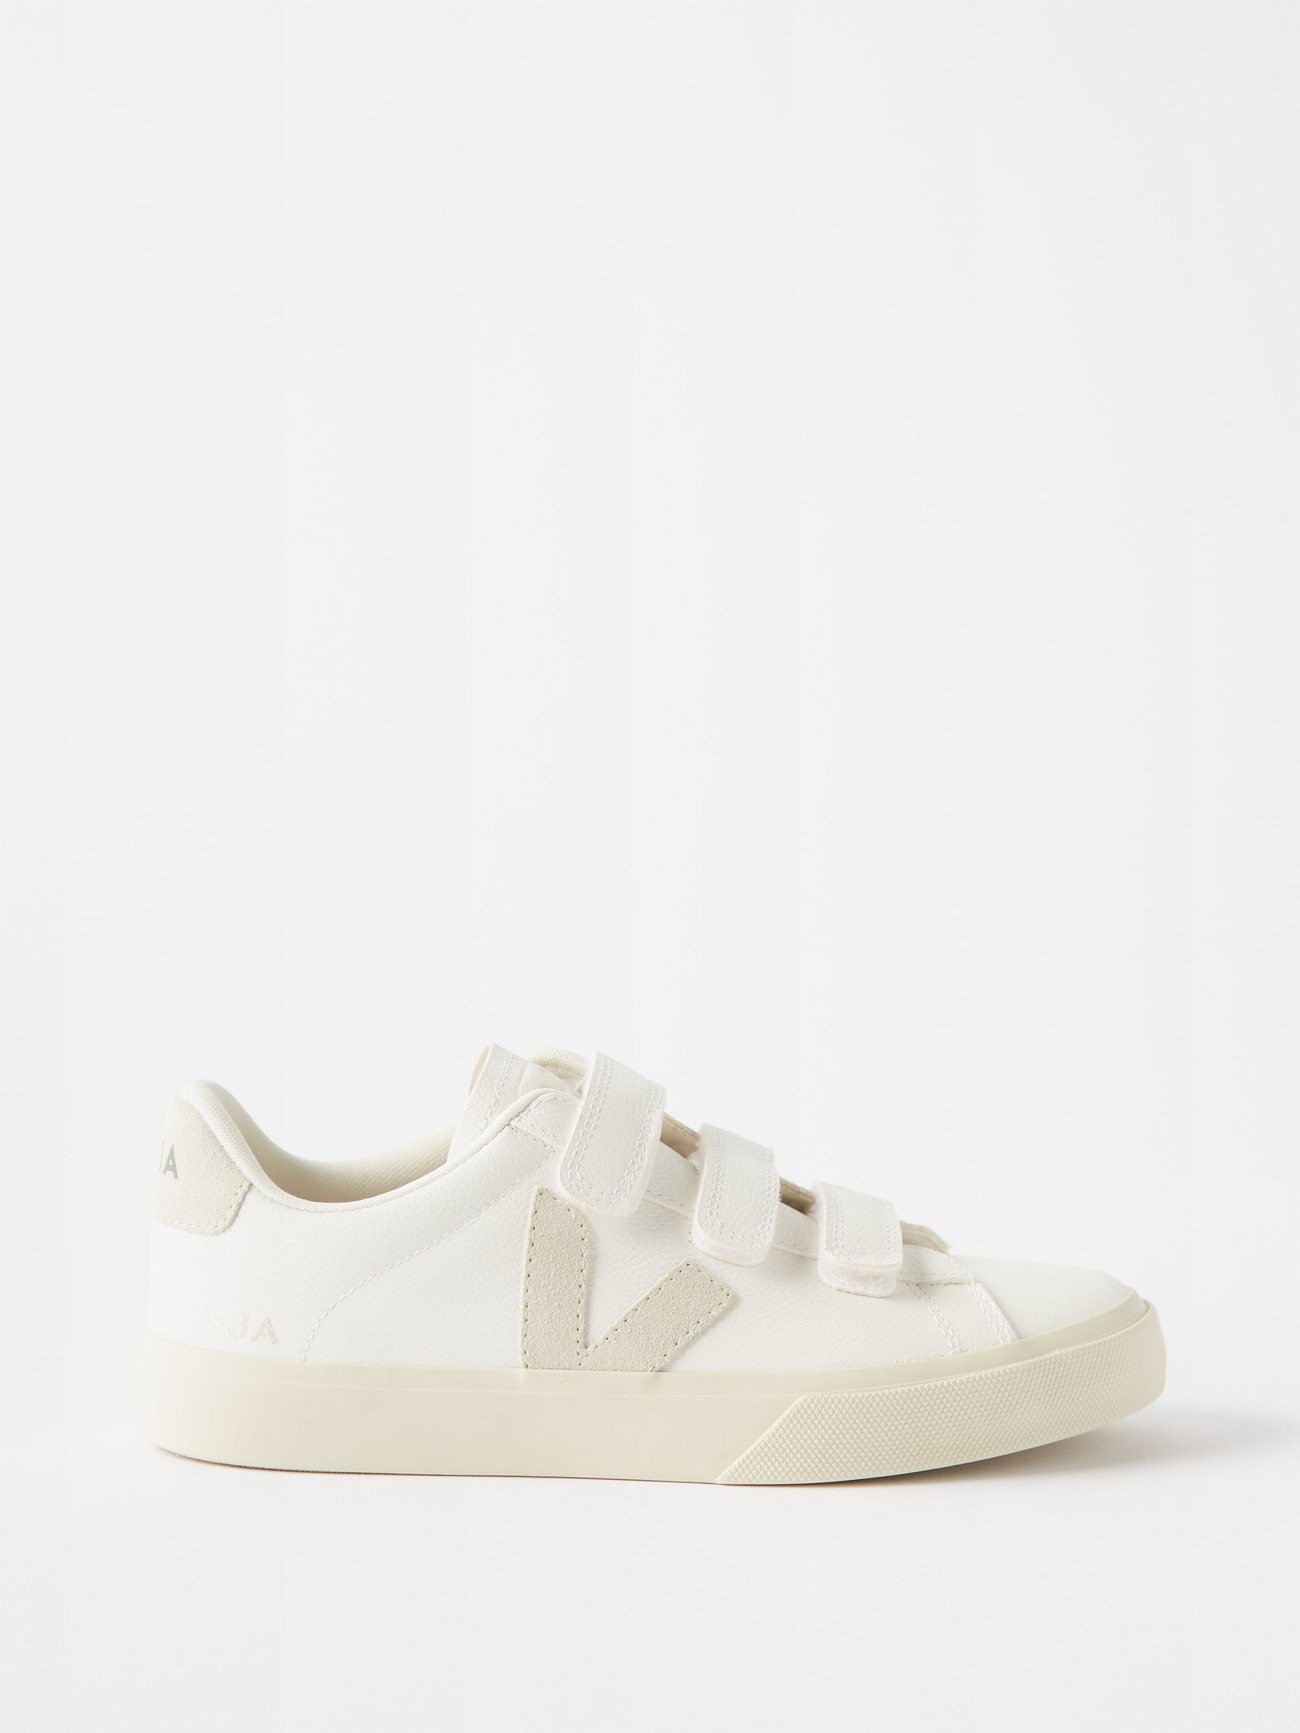 VEJA, 'Recife' Velcro Strap Leather Low Top Sneakers